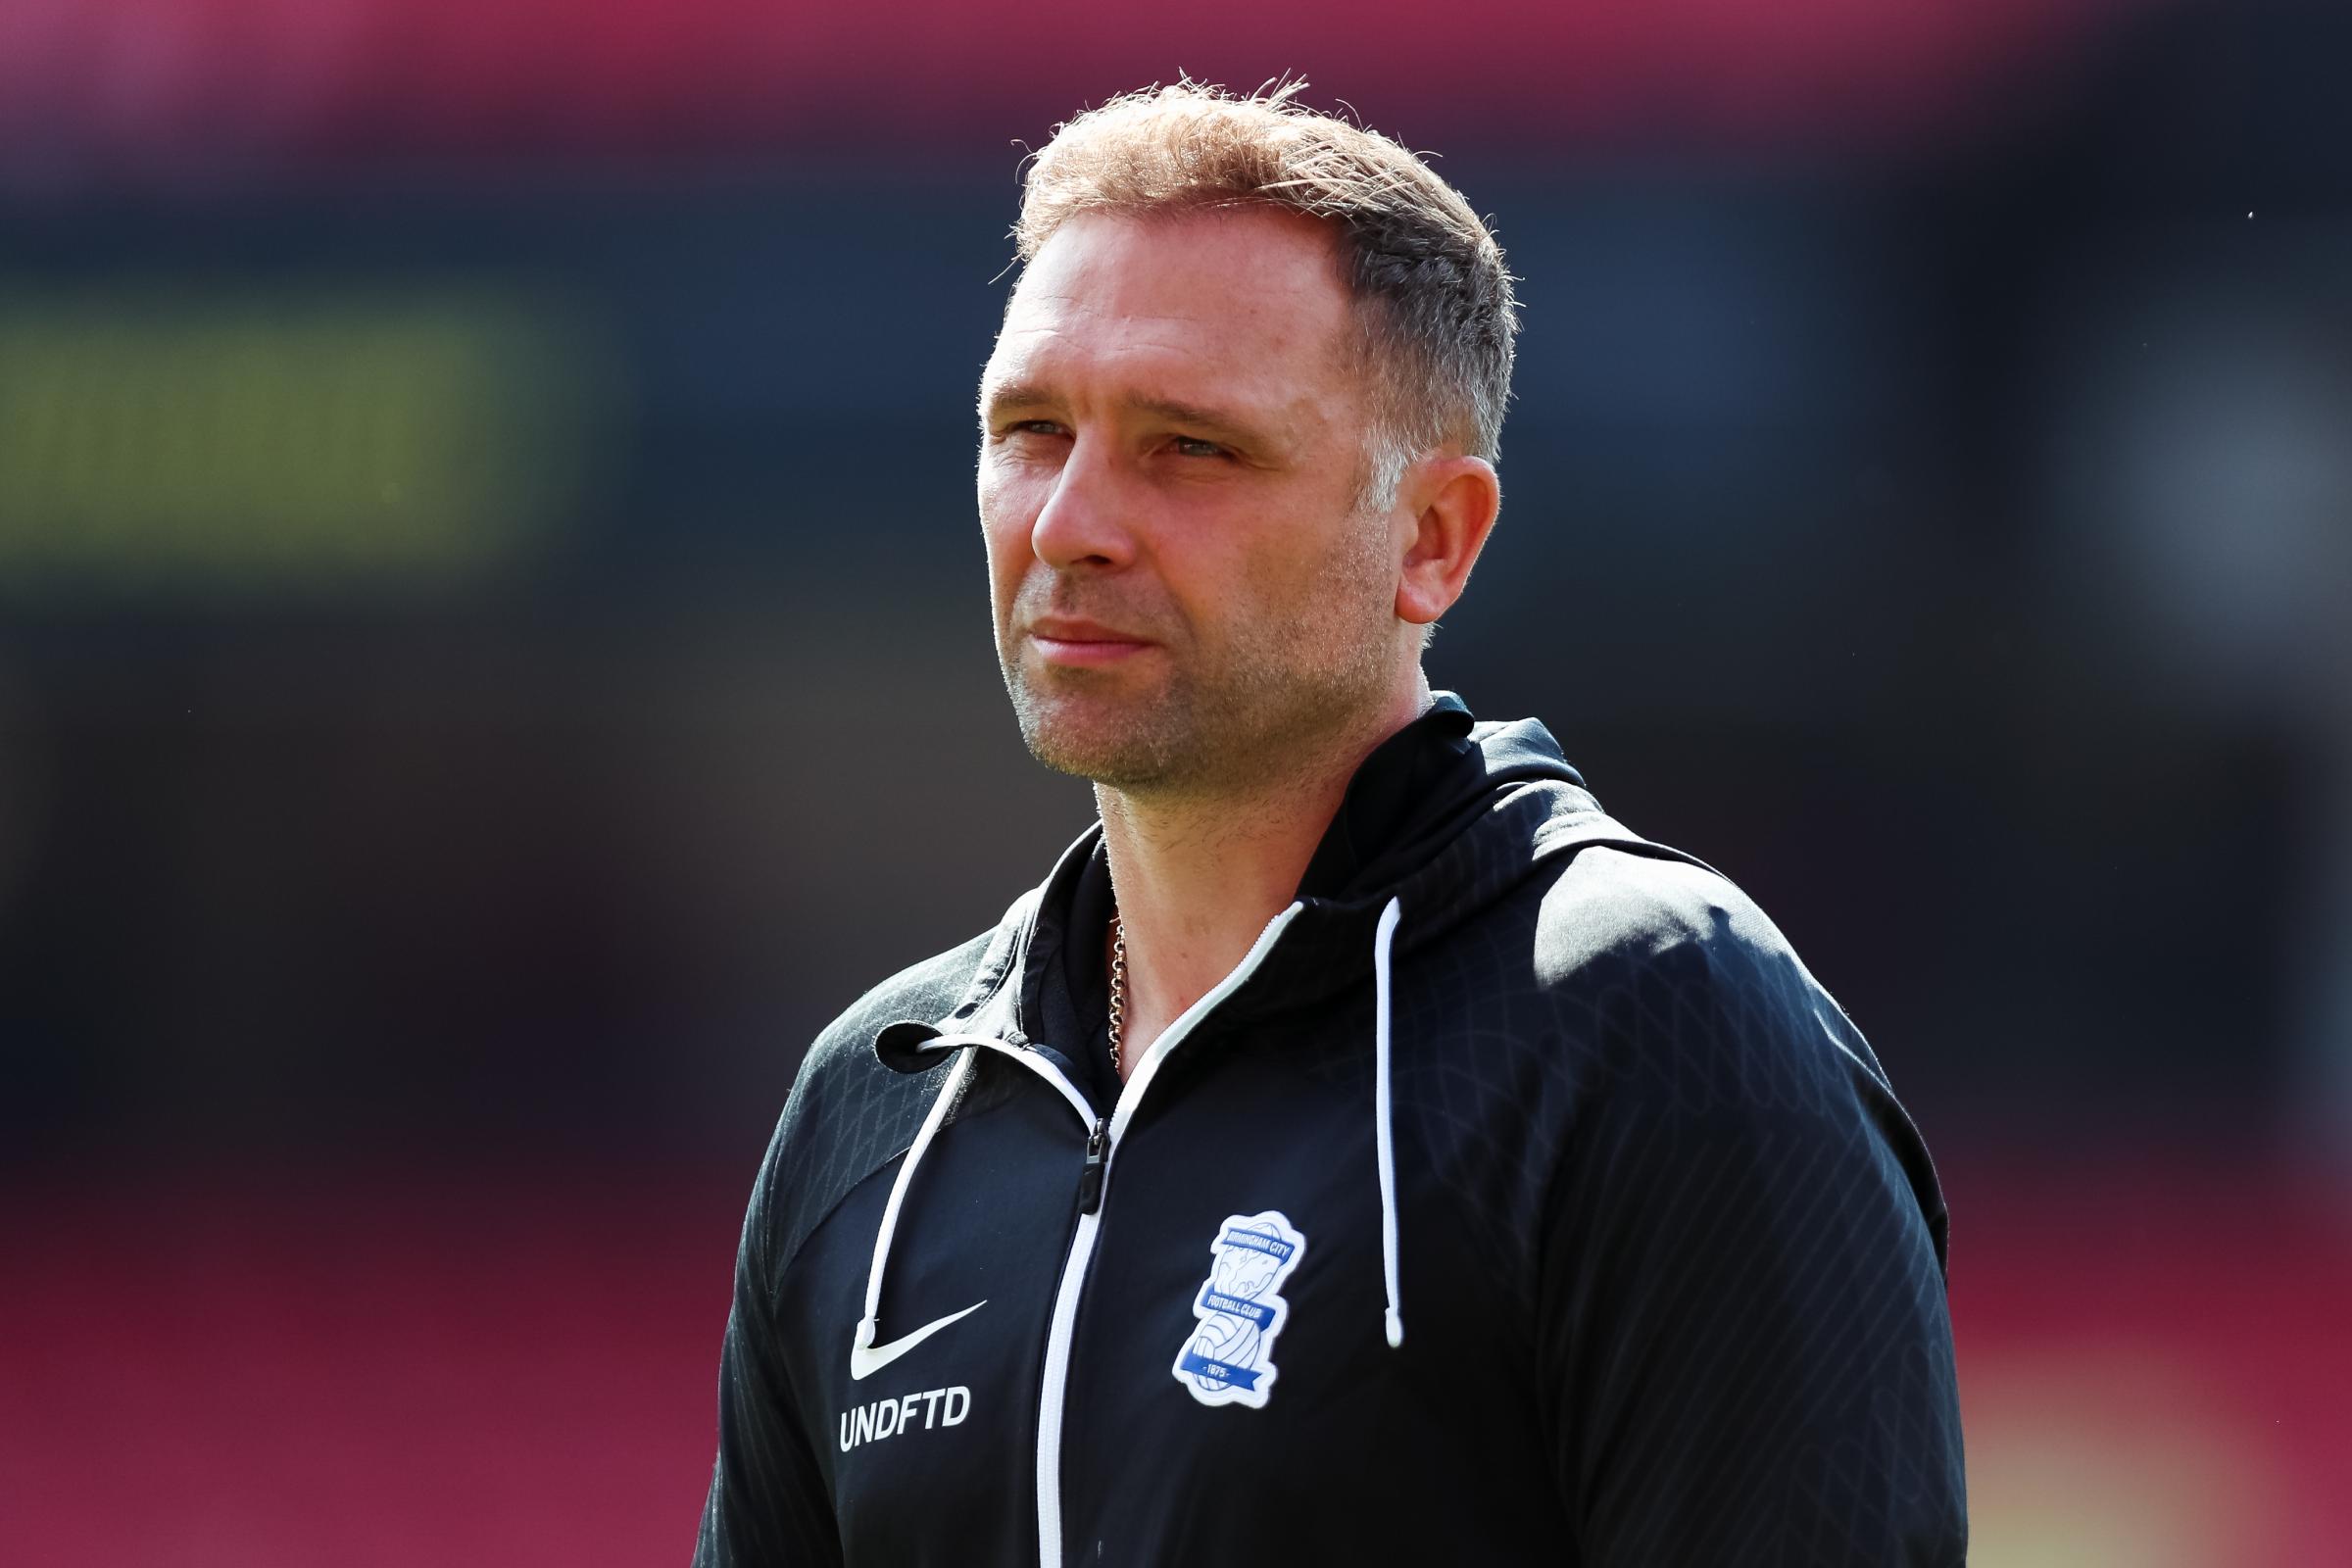 Blackburn Rovers confirm Eustace appointment ahead of Stoke